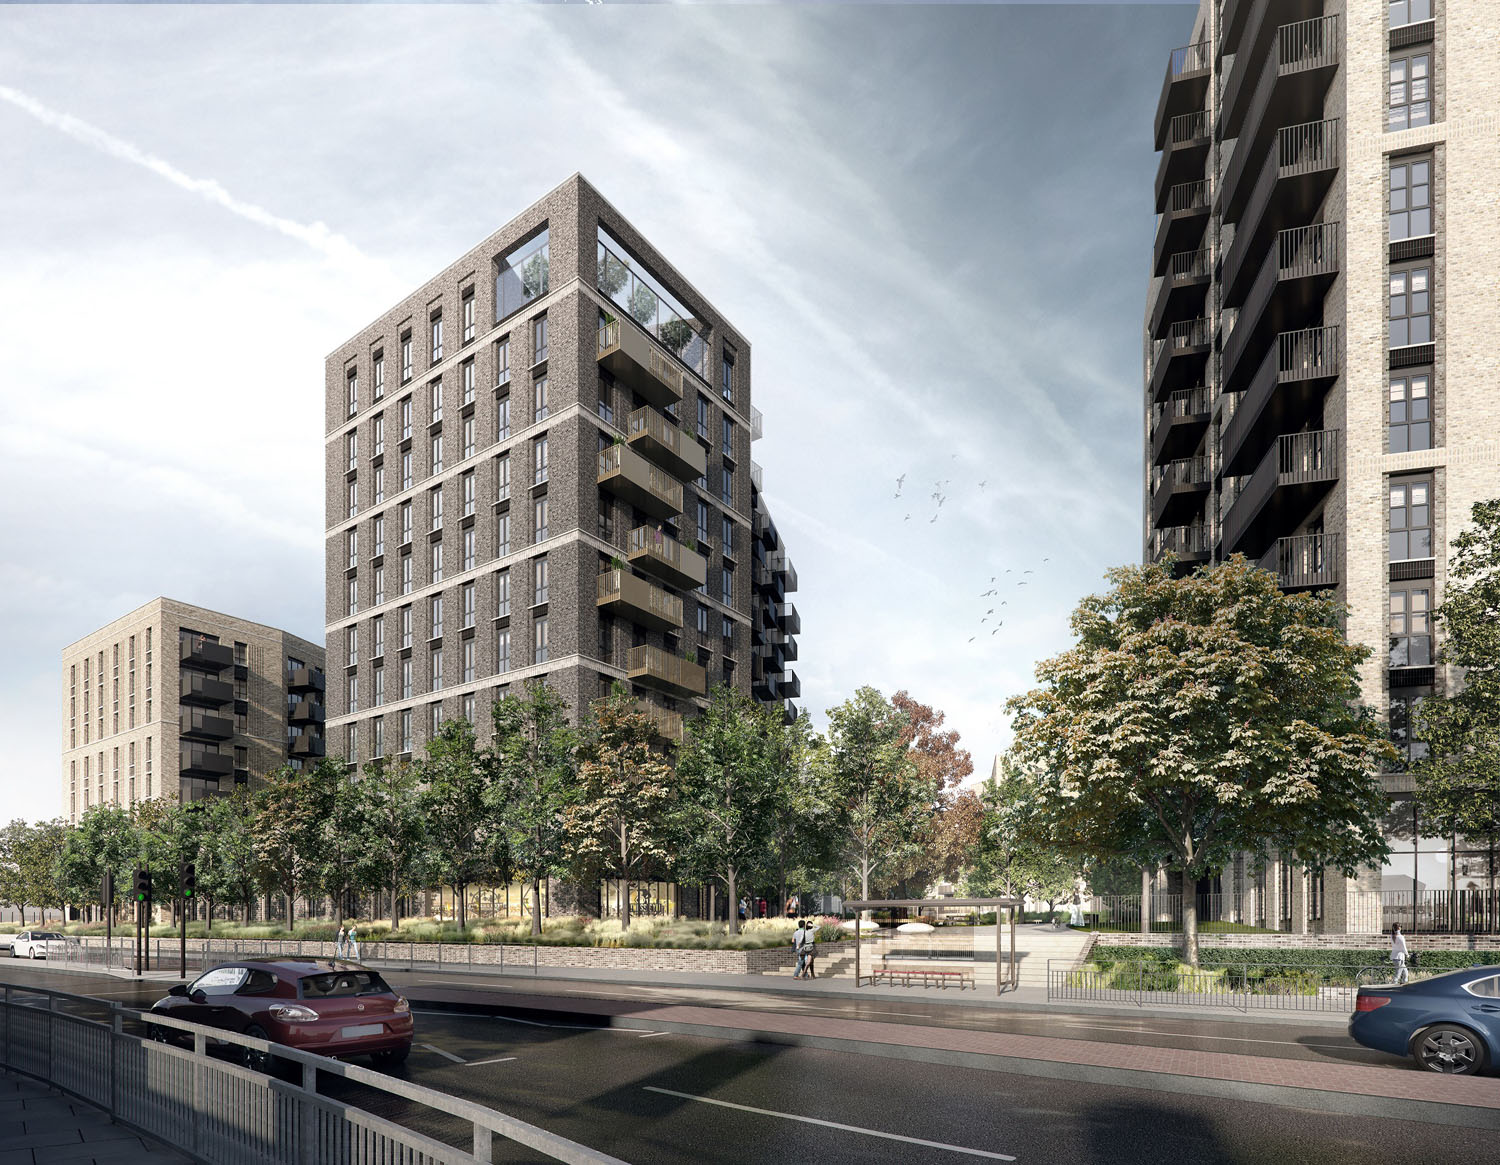 Lovell given the green light to build £290m housing regeneration scheme in Woolwich